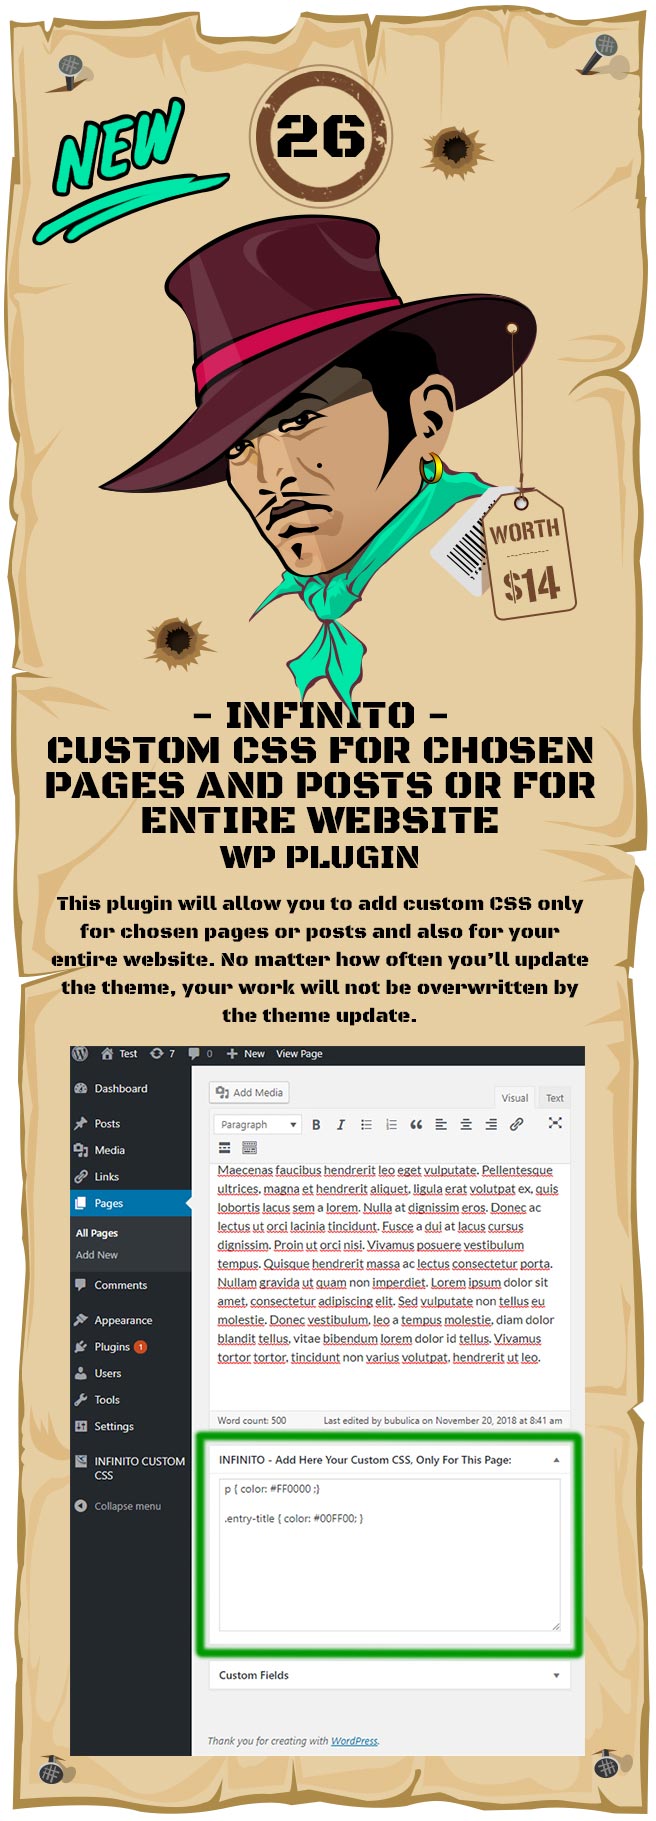 INFINITO - Custom CSS for chosen pages and posts or for the entire website - WordPress plugin